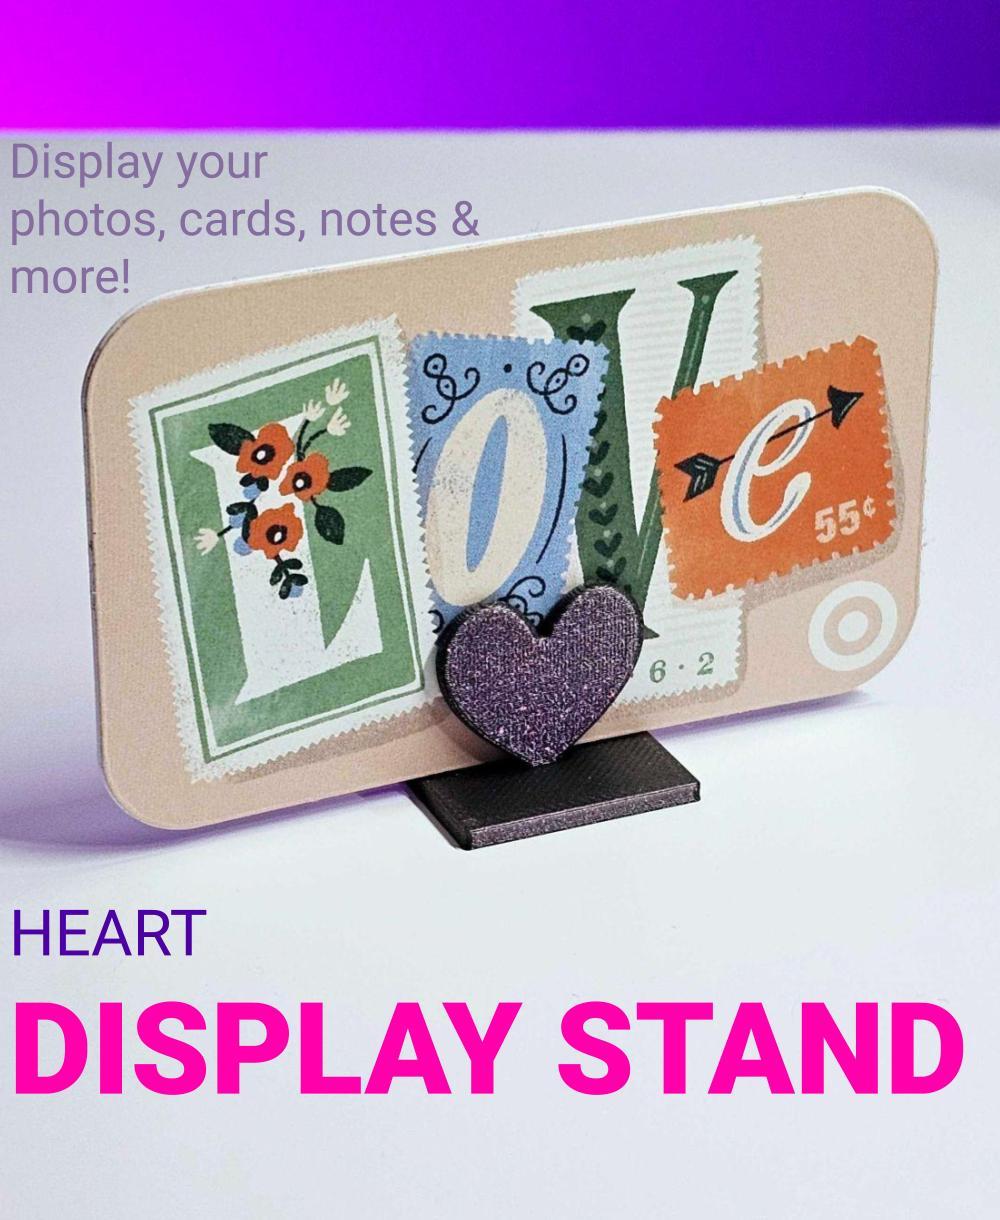 [Quick Mother's Day gift accessory] Heart display stand | Holds photos, cards, notes and more! 3d model